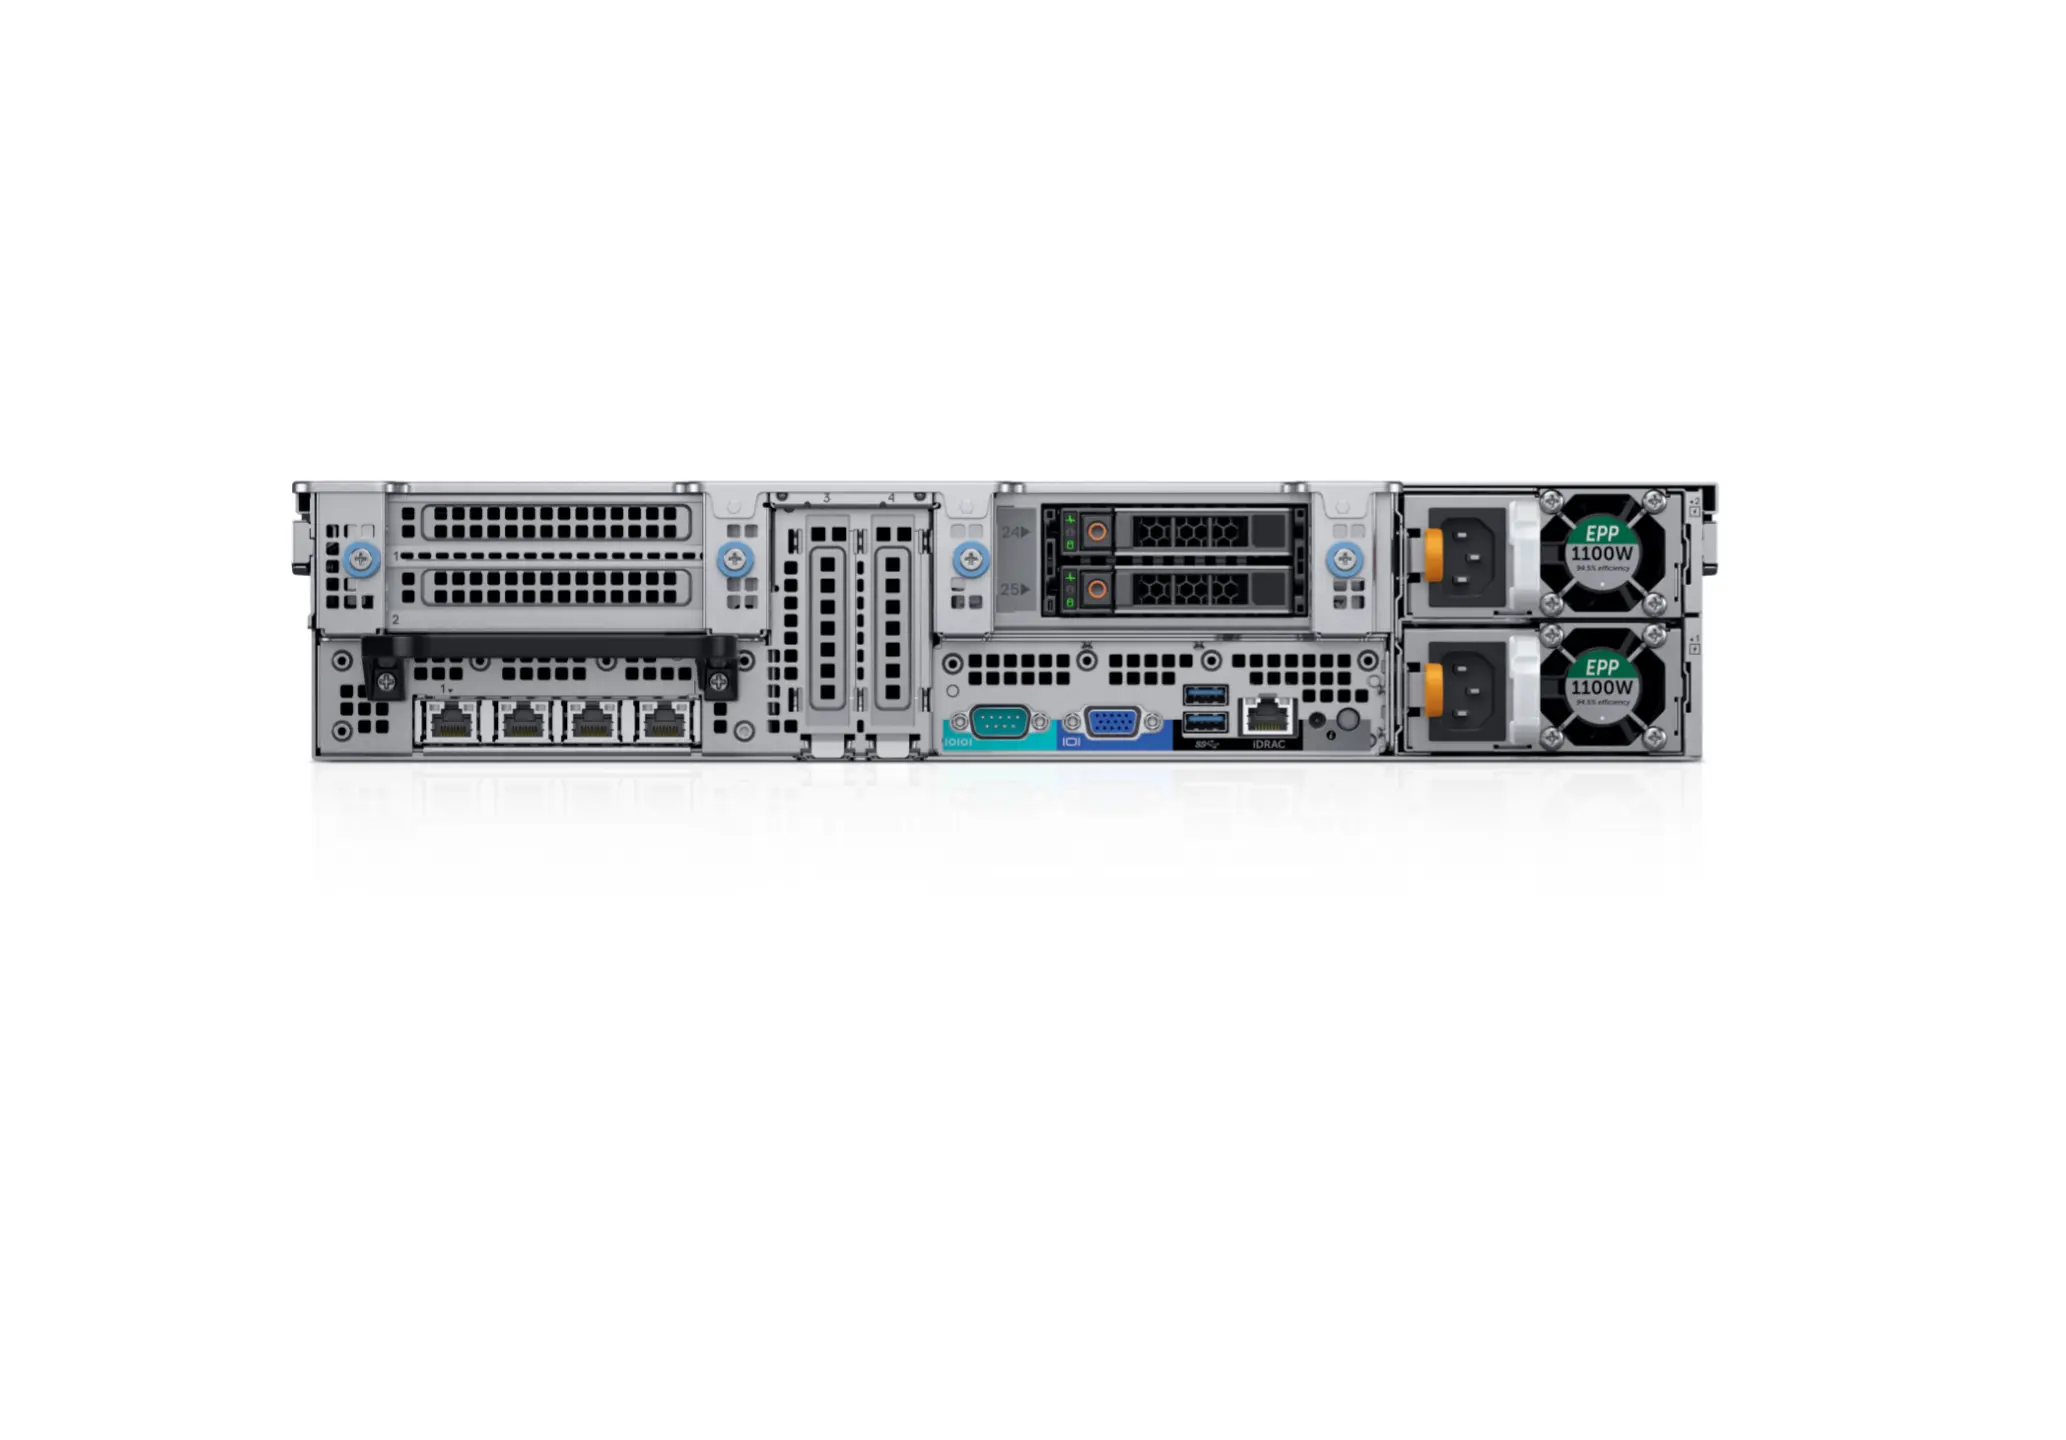 R840 delivers consistent high performance results for data-intensive applications and data analytic workloads R840 Rack Server